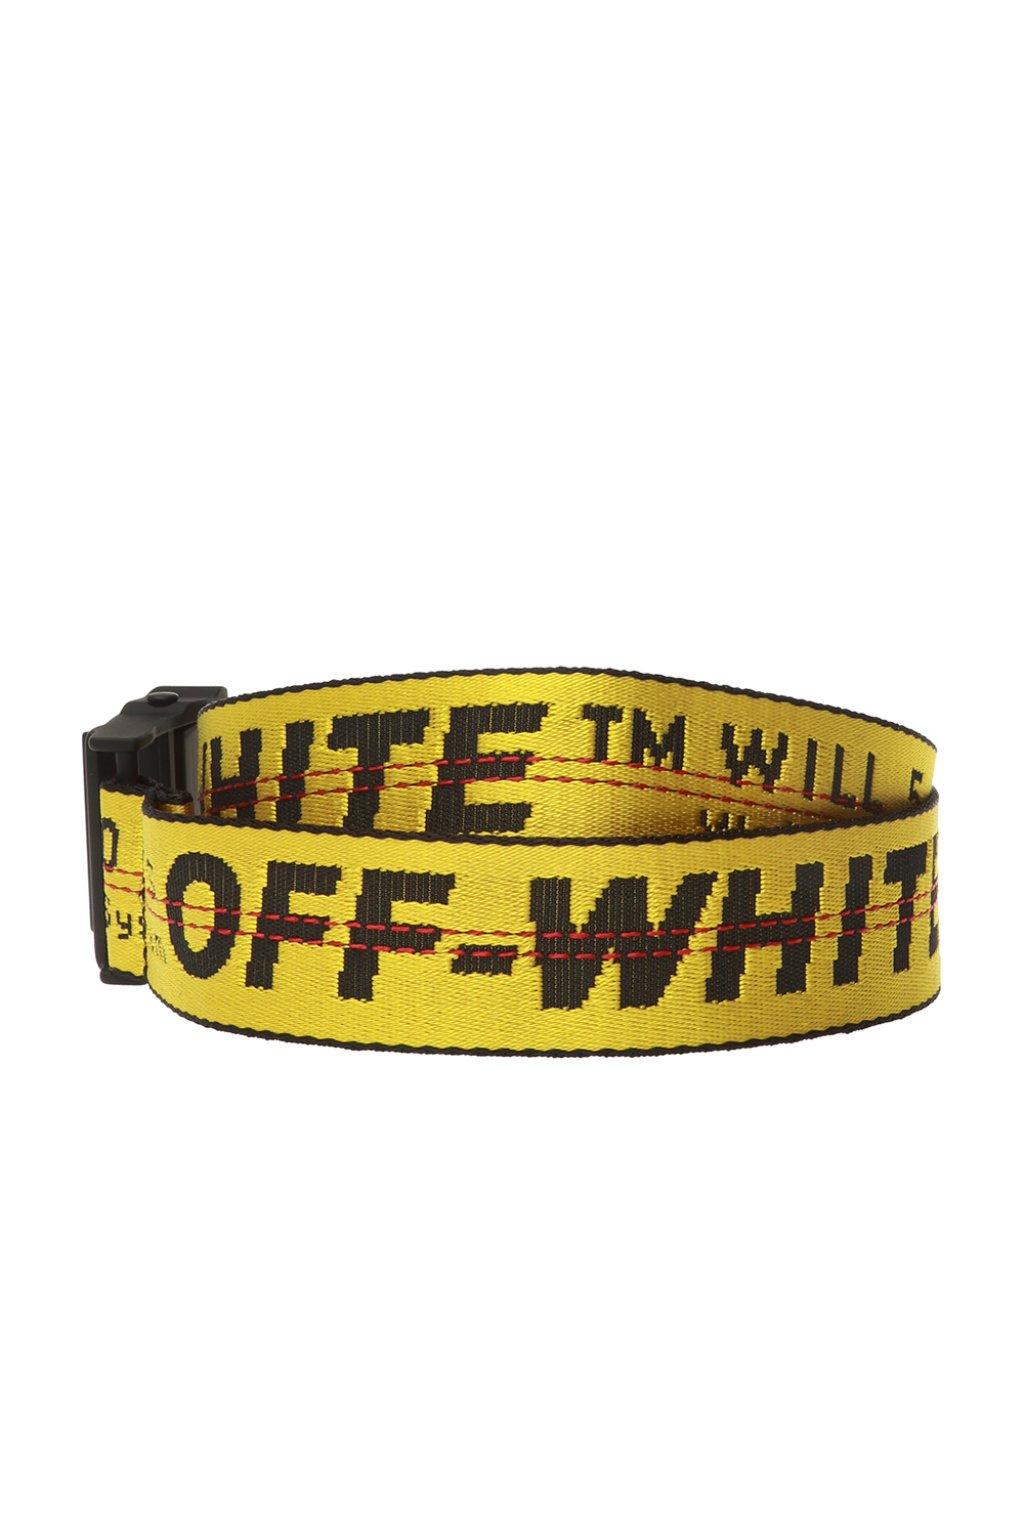 Off-White c/o Virgil Abloh Synthetic Belt With Logo Yellow for Men - Lyst